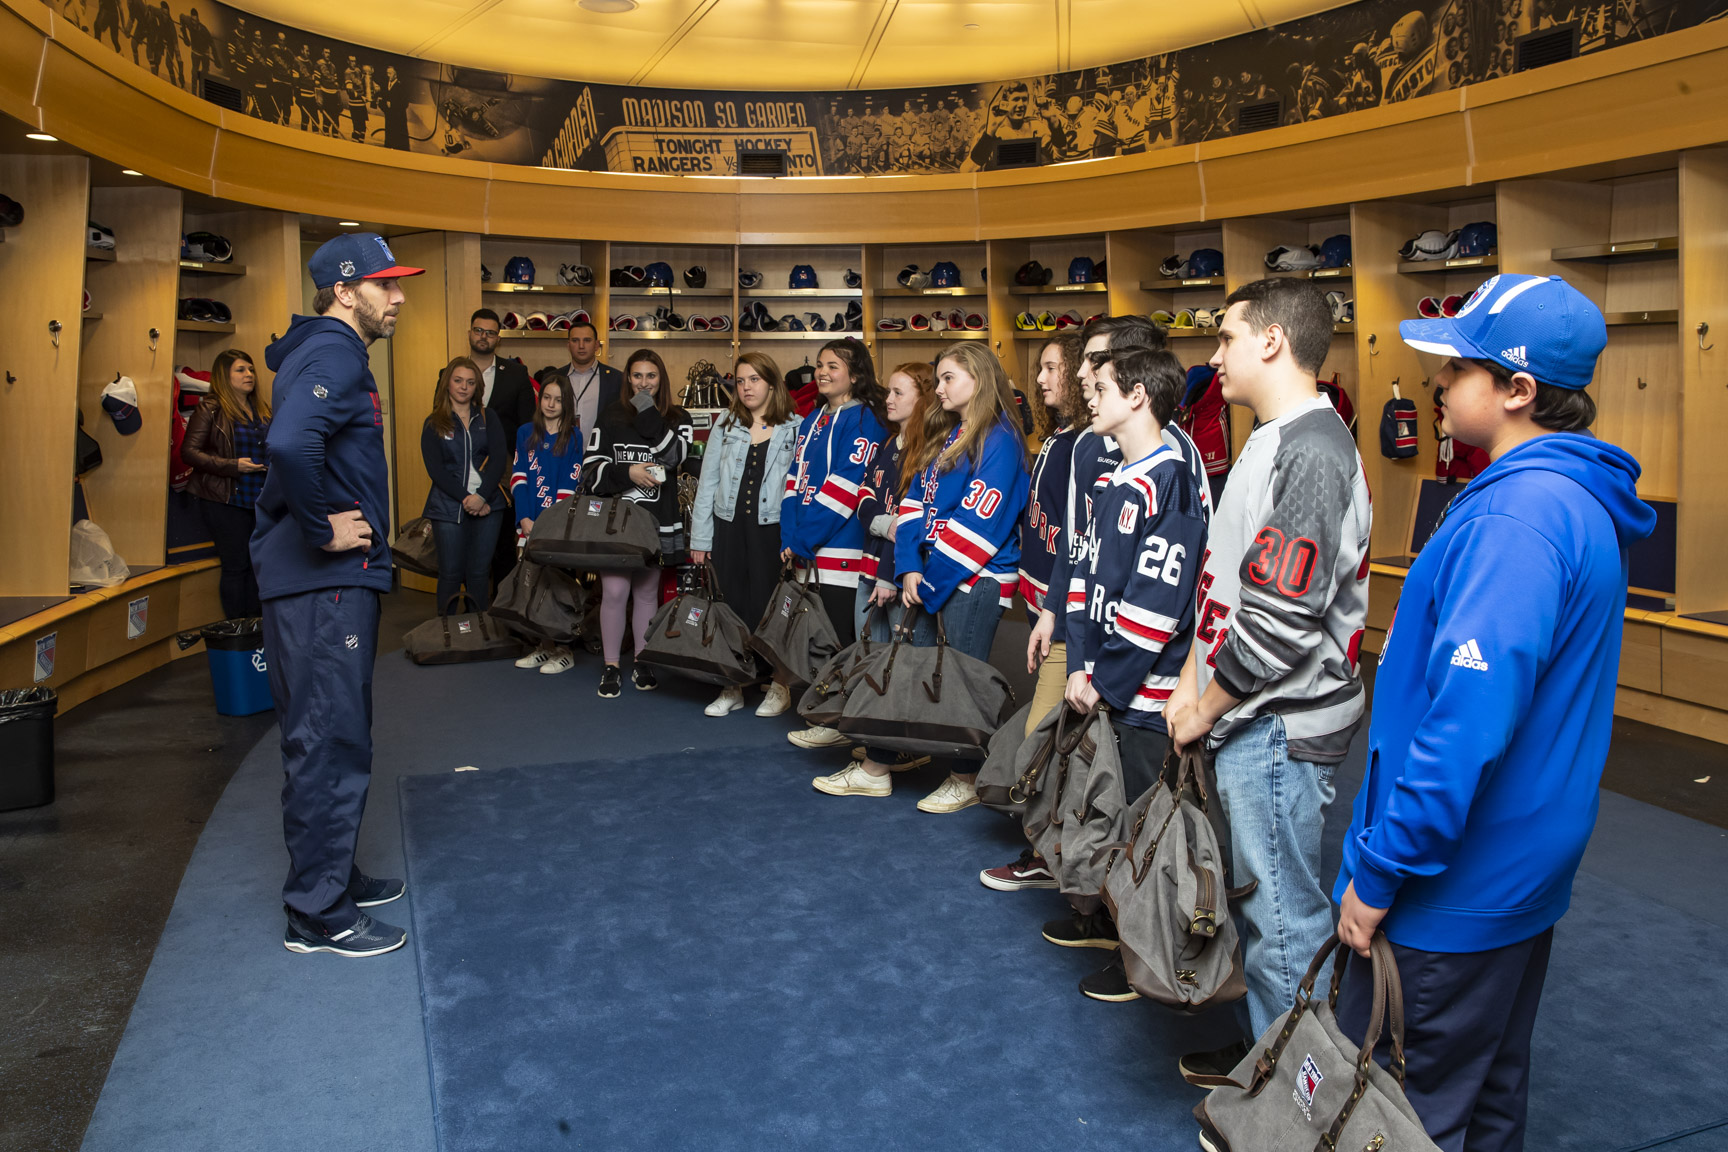 Last week our HLF Young Ambassadors attended a Service Learning Event hosted by Chase. After a career chat, YAs cheered for the New York Rangers and ended the night with HLF co-founder Henrik Lundqvist in the Rangers locker room! 
[Photo credit: Rebecca Taylor/MSG Photos]